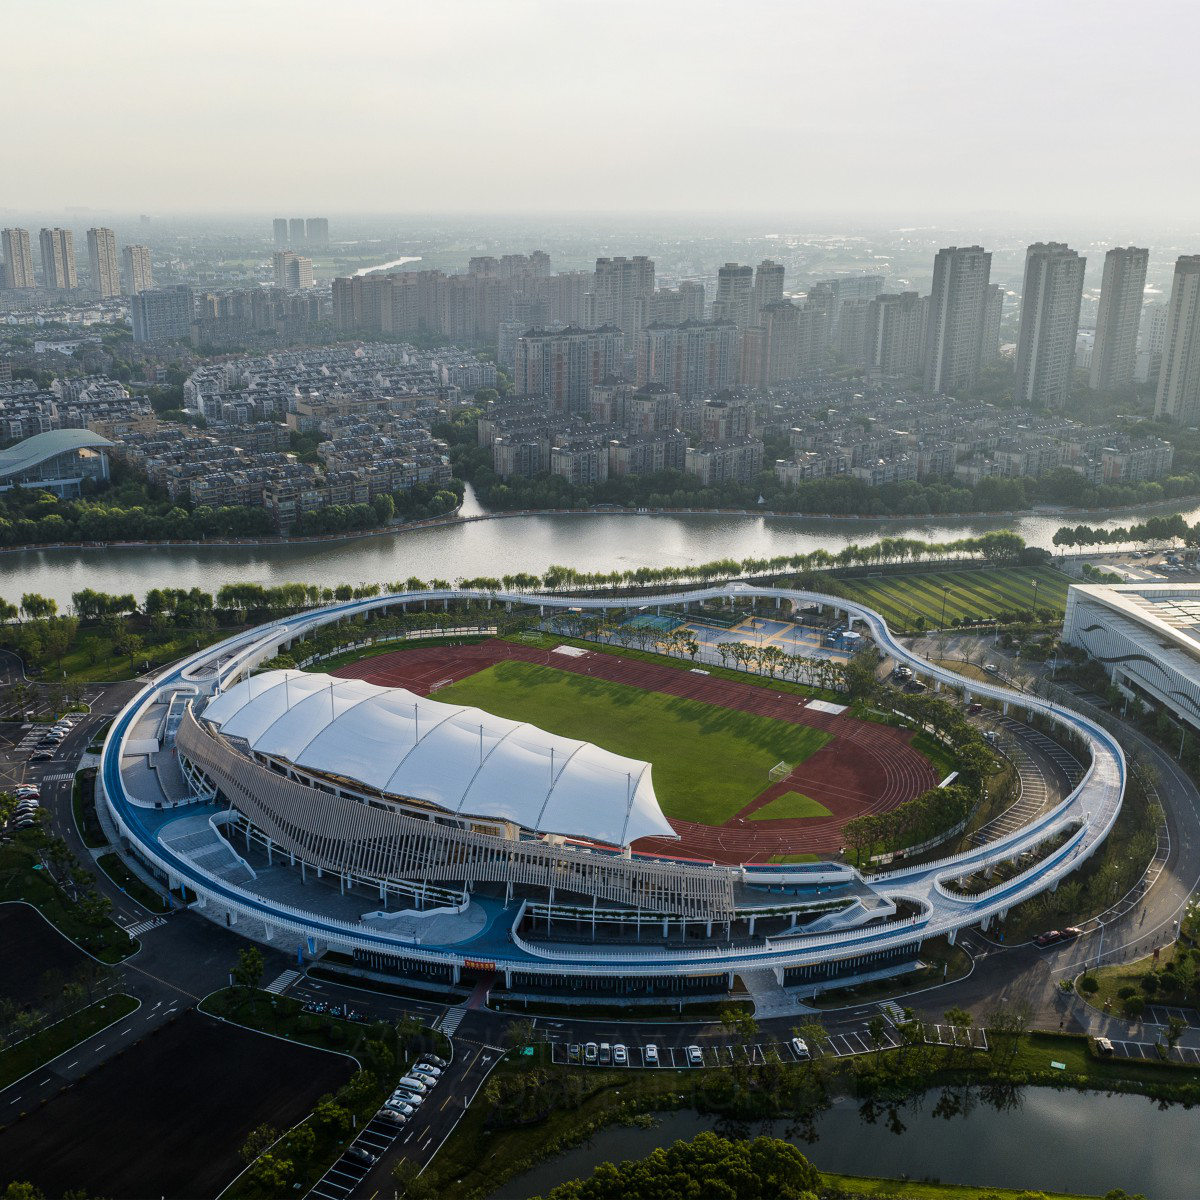 Zhejiang Pinghu Sports Center by FREDERIC ROLLAND ARCHITECTURE